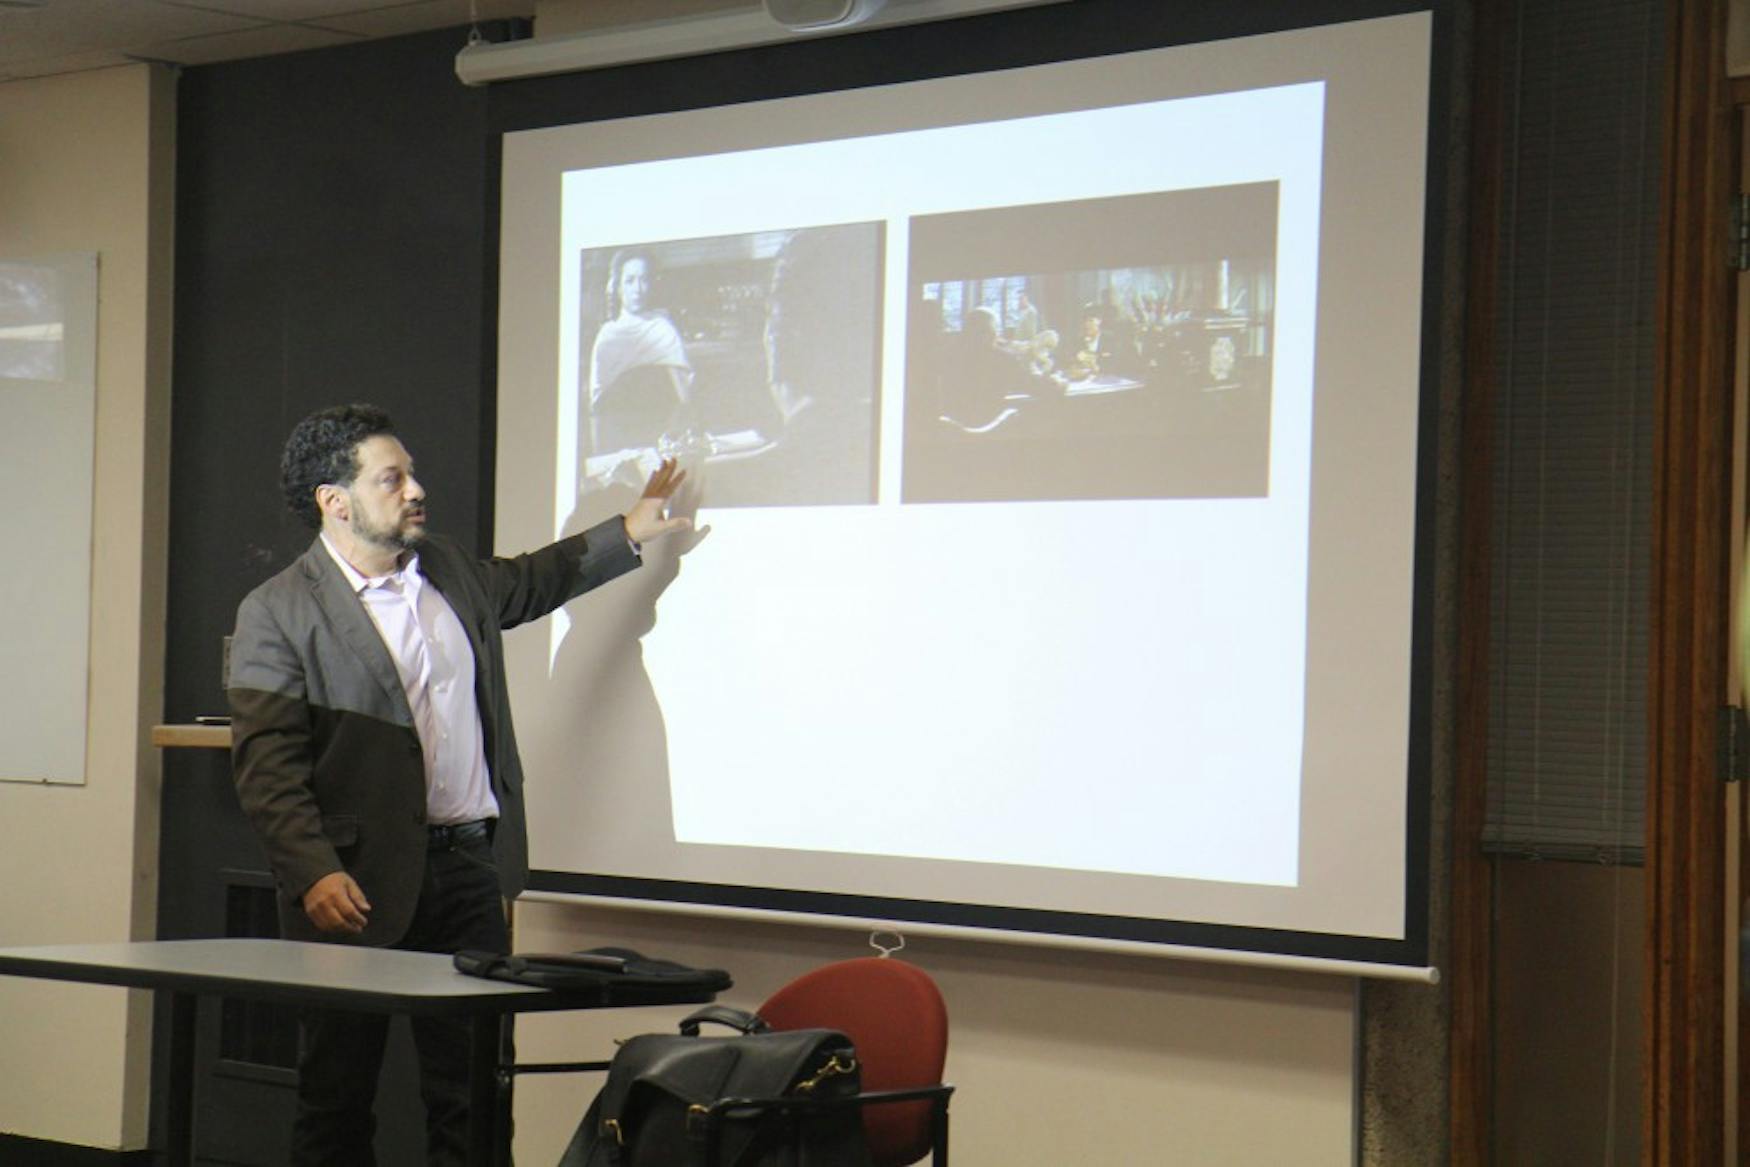 FOREIGN AFFAIRS: Harvard Fellow Seth Fein spoke on Wednesday afternoon about his work on collaborative films between Mexico and America during the Cold War.